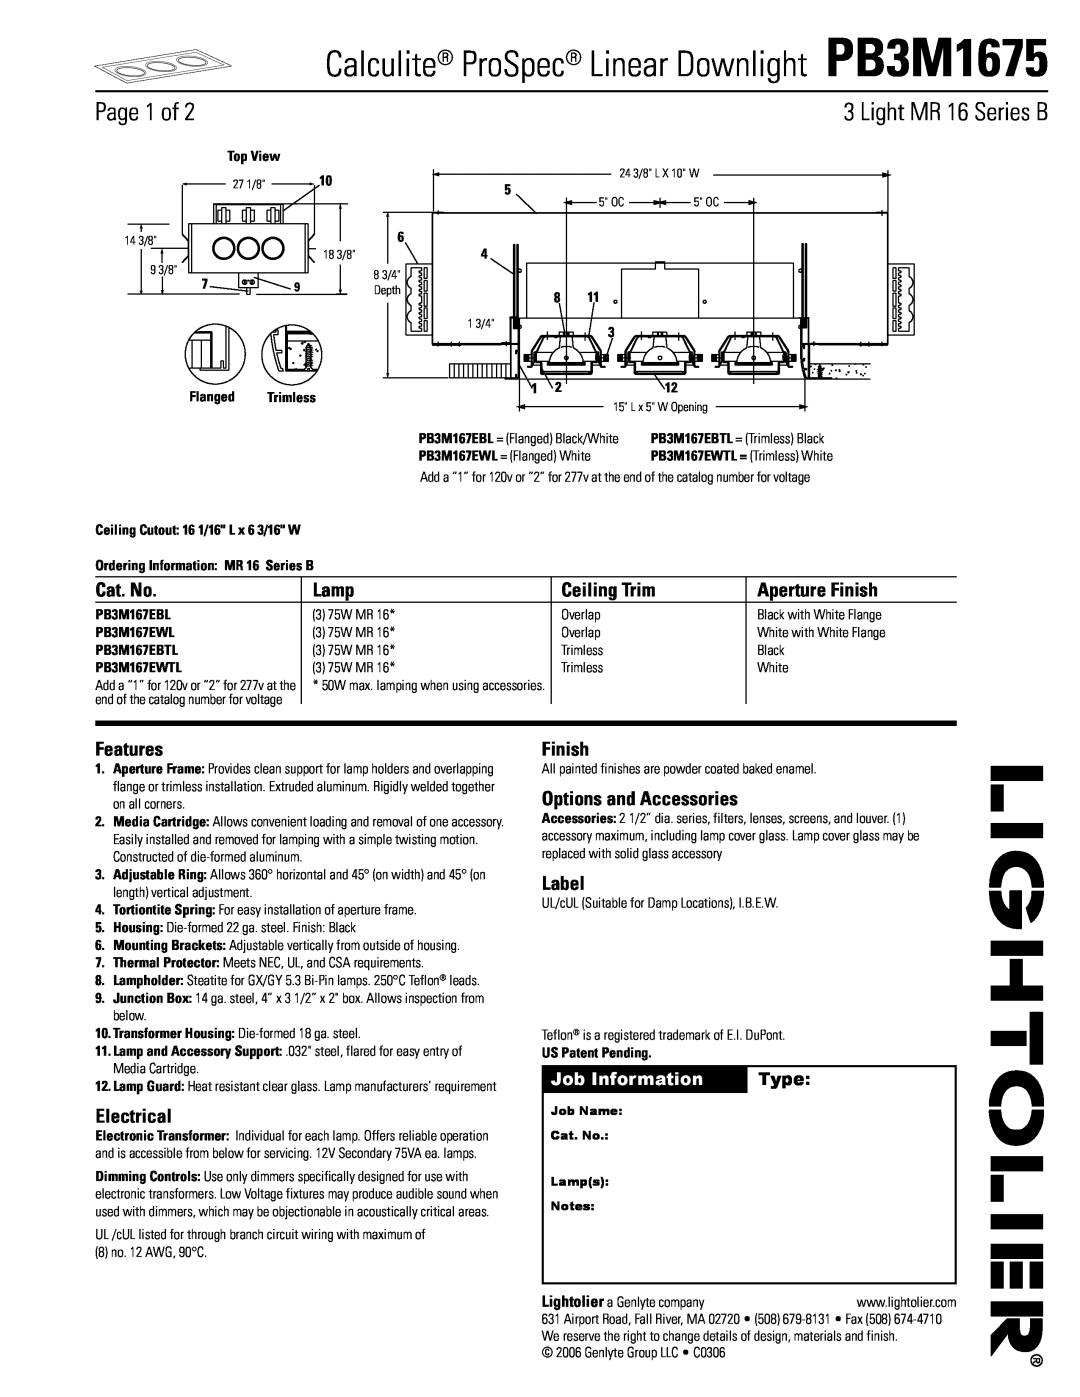 Lightolier manual Calculite ProSpec Linear Downlight PB3M1675, Page 1 of, Light MR 16 Series B, Cat. No, Lamp, Features 